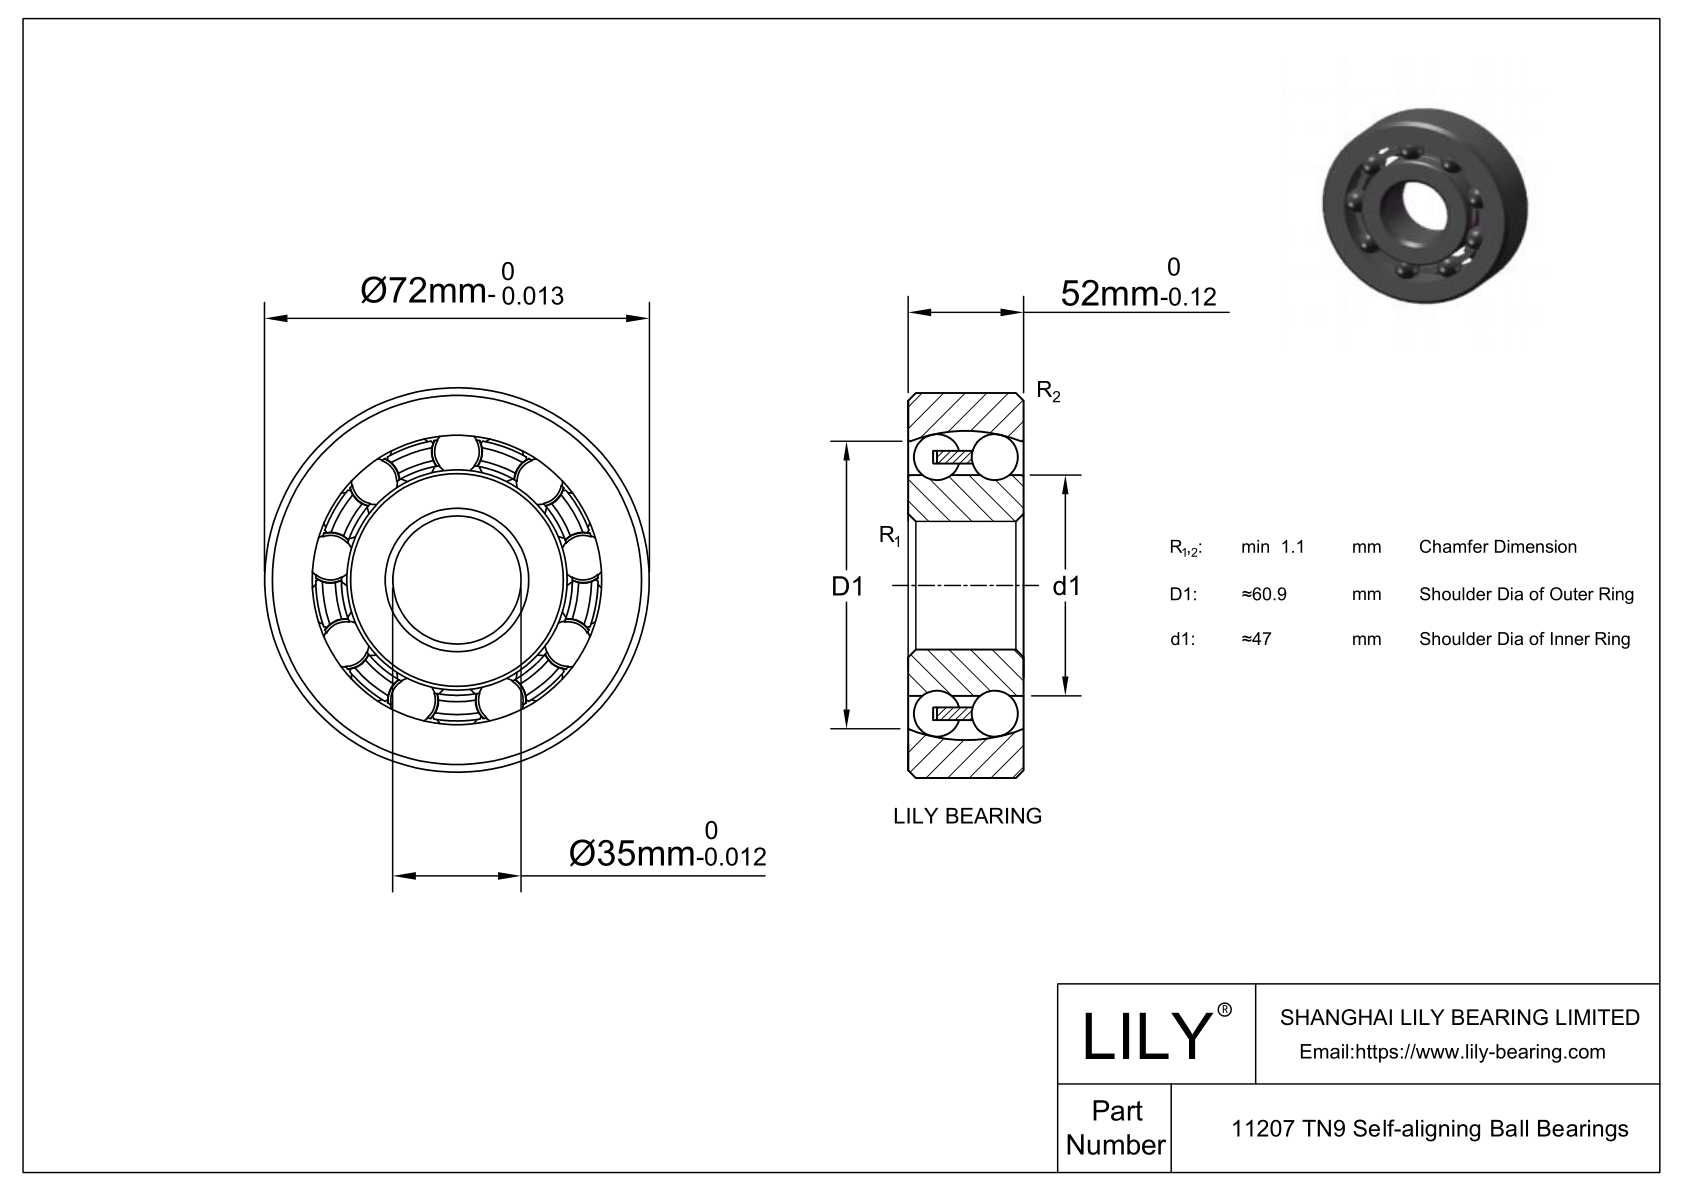 CE11207SC Silicon Carbide Self Aligning Ball Bearings cad drawing